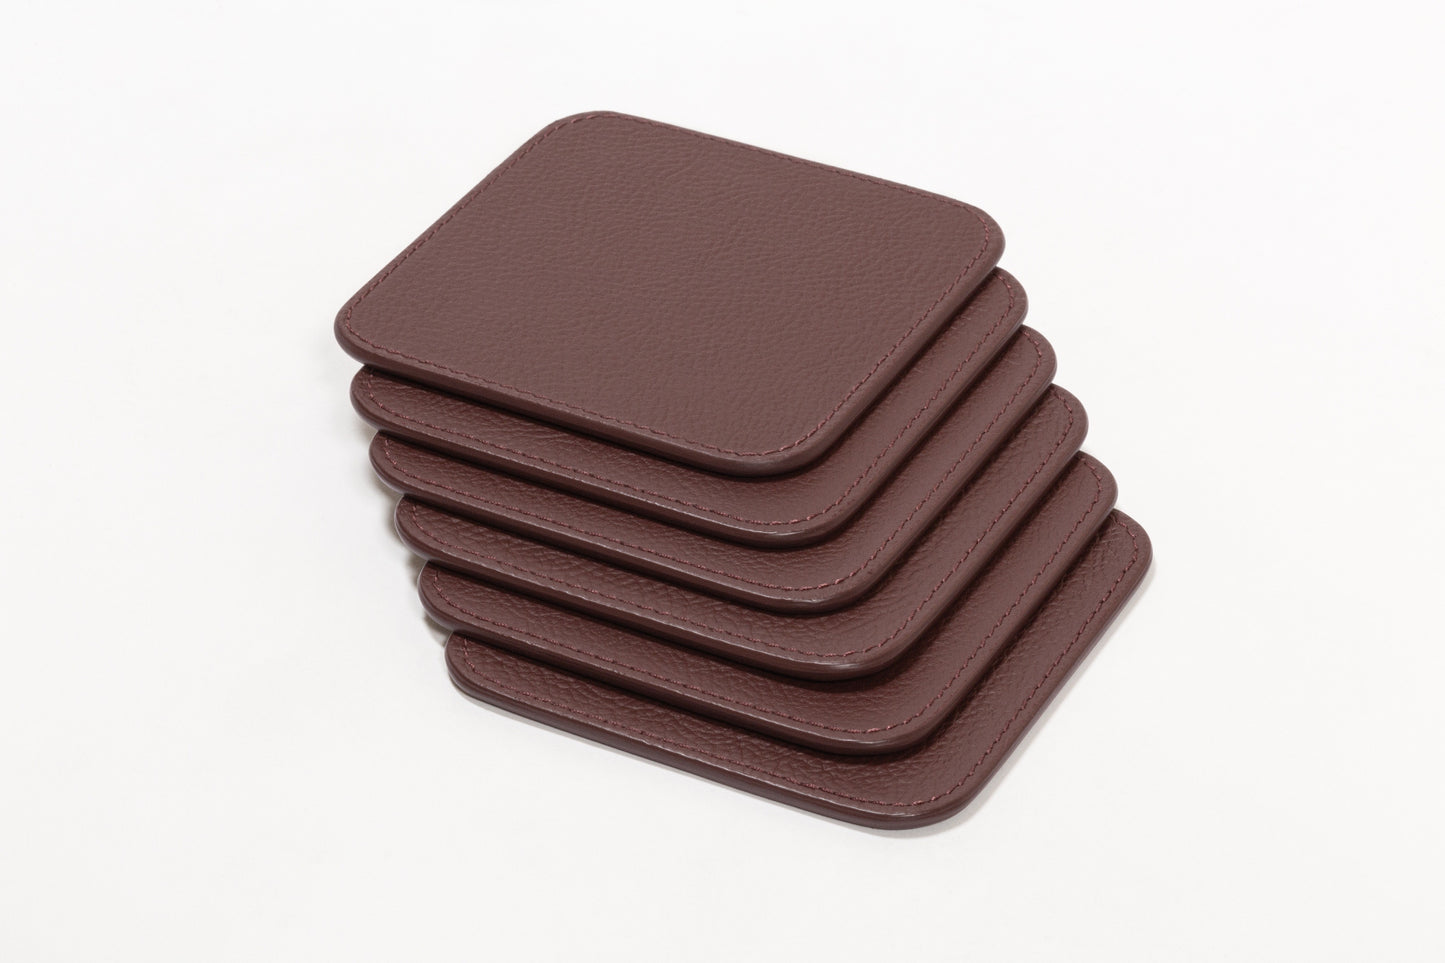 Giobagnara x Poltrona Frau Coaster Holder With 6 Coasters | All-Leather Coasters | Leather-Covered Coaster Holder with Walnut Wood Inserts | Stylish and Elegant Home Accessories | Explore a Range of Luxury Home Decor at 2Jour Concierge, #1 luxury high-end gift & lifestyle shop